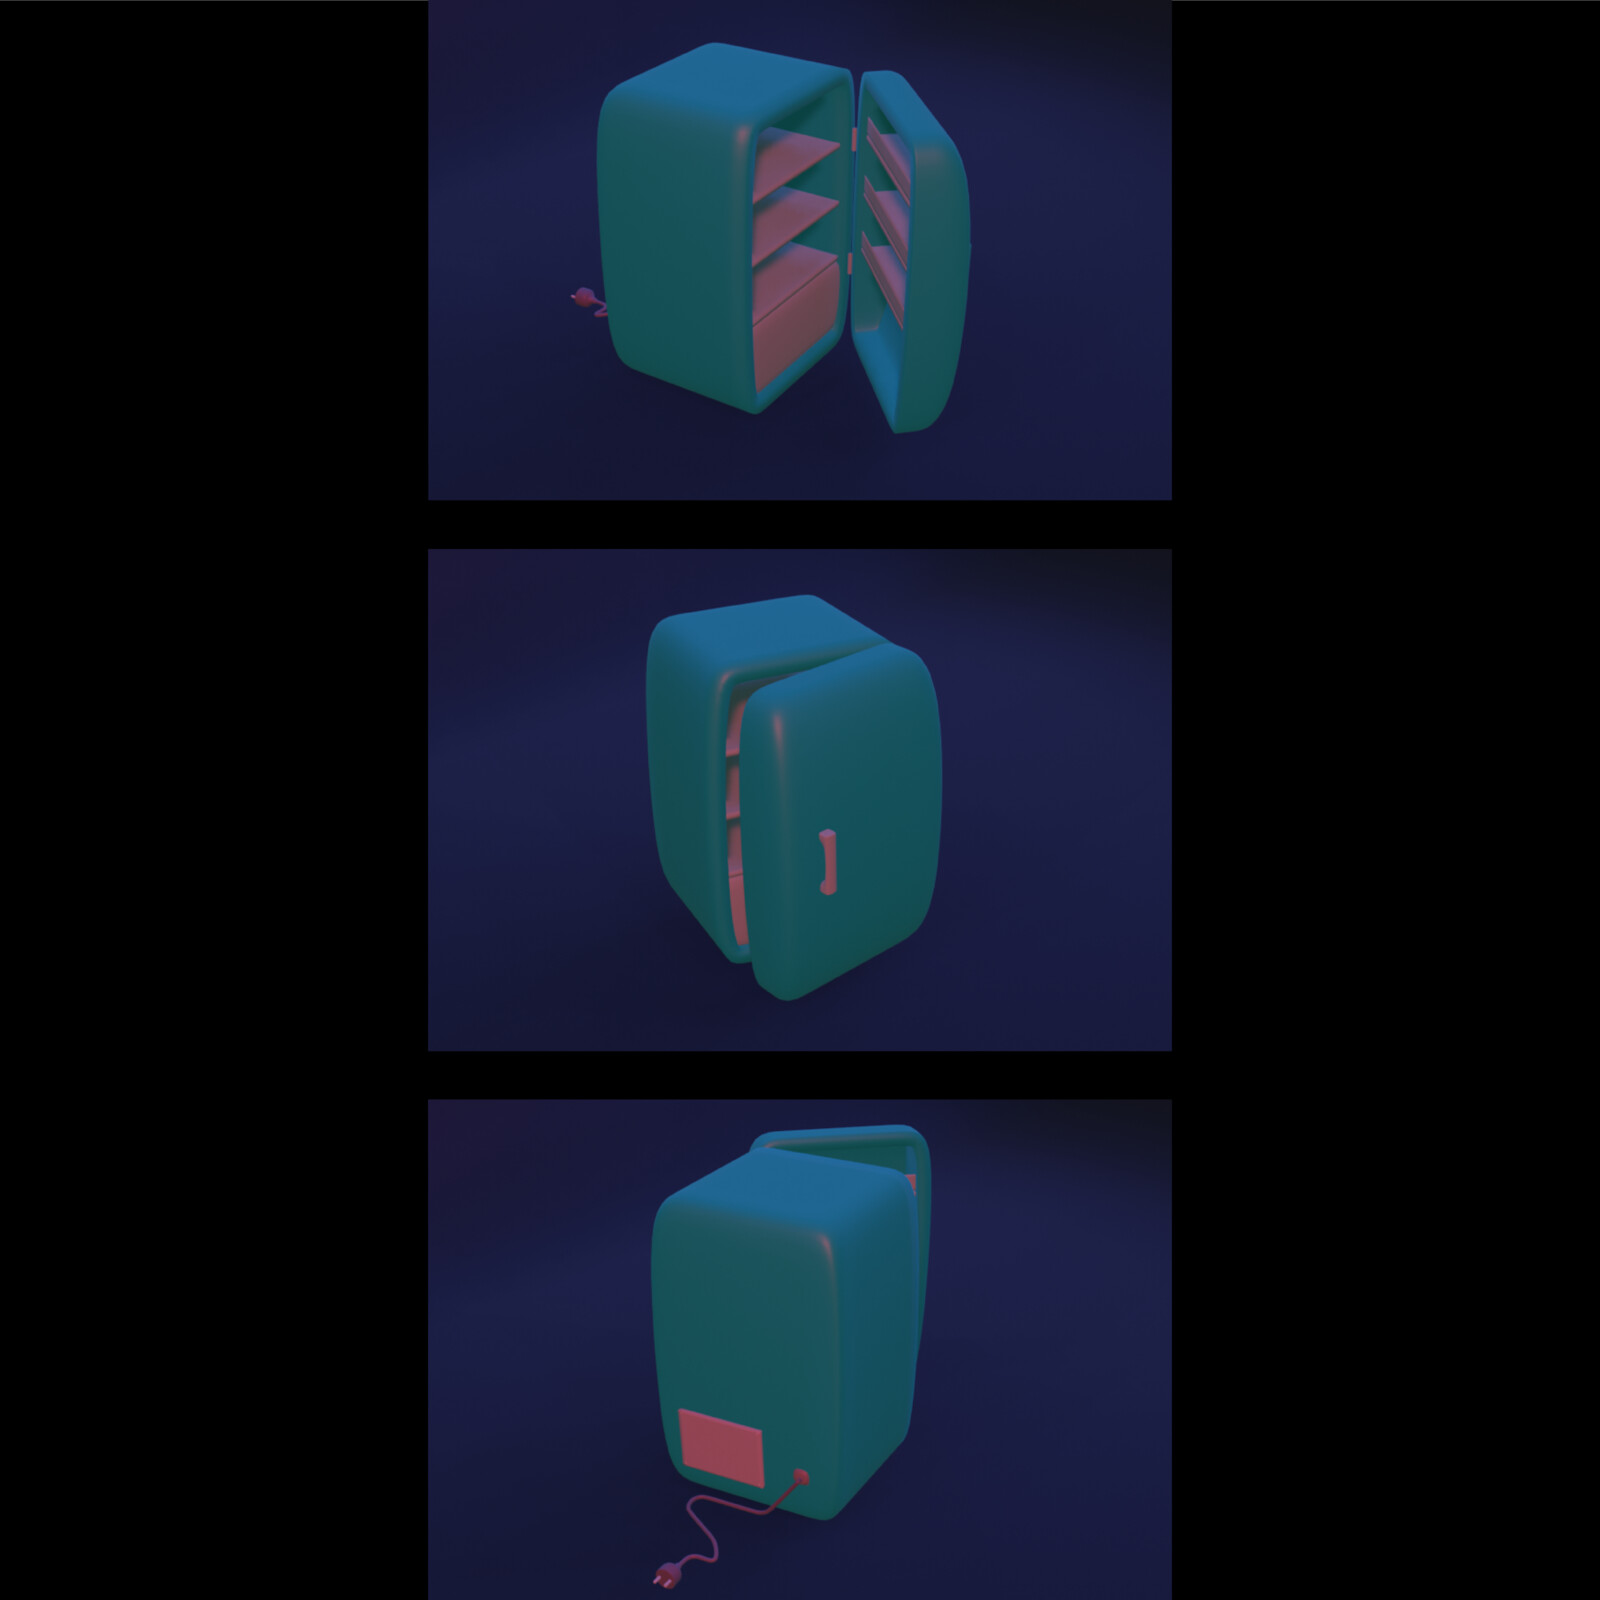 Game Art Assets I created: Stylized Fridge.

Modeled, painted and rendered in Blender. Rendered images put together in Adobe Illustrator